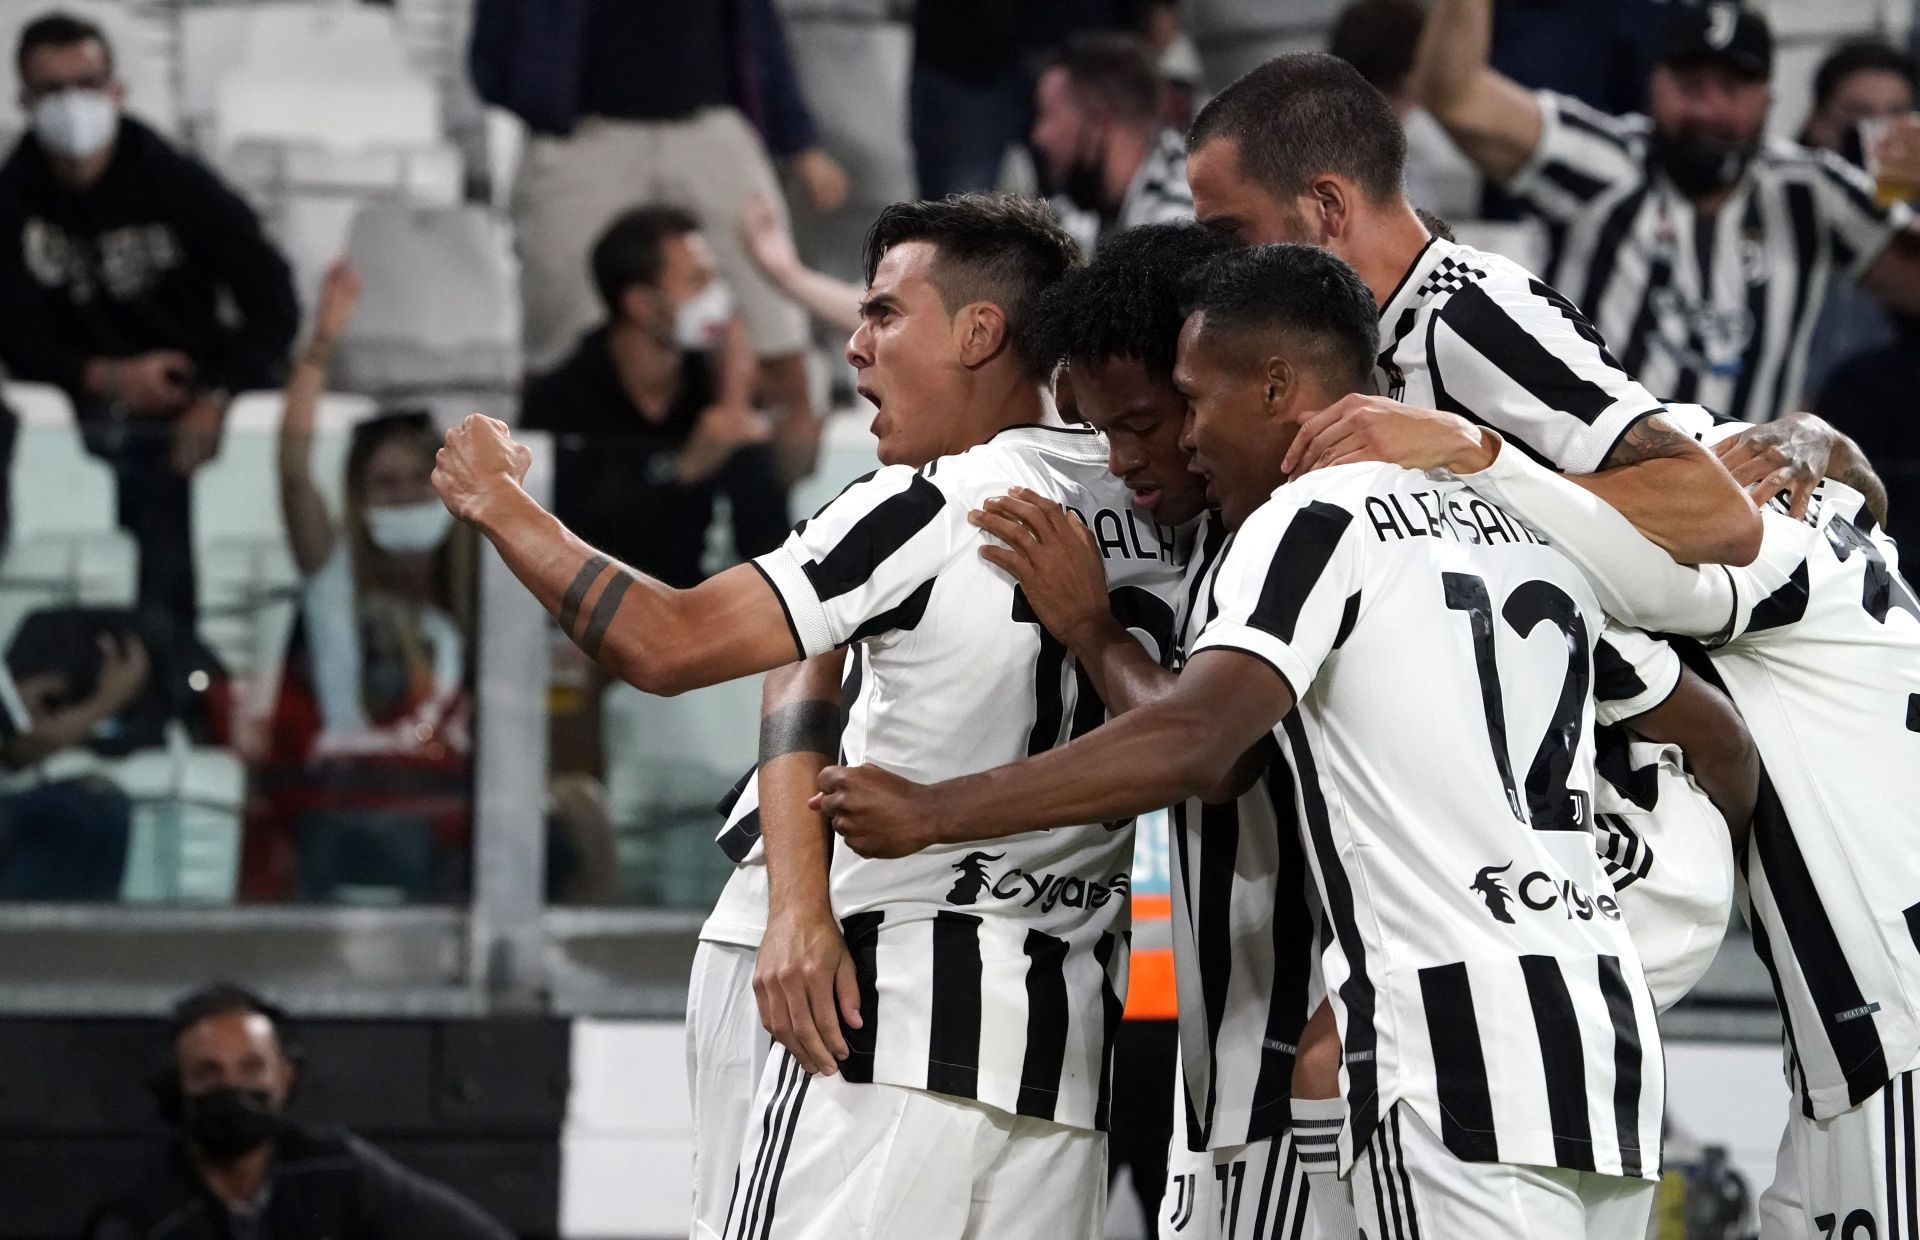 Juventus play Roma on Sunday in their next Serie A game